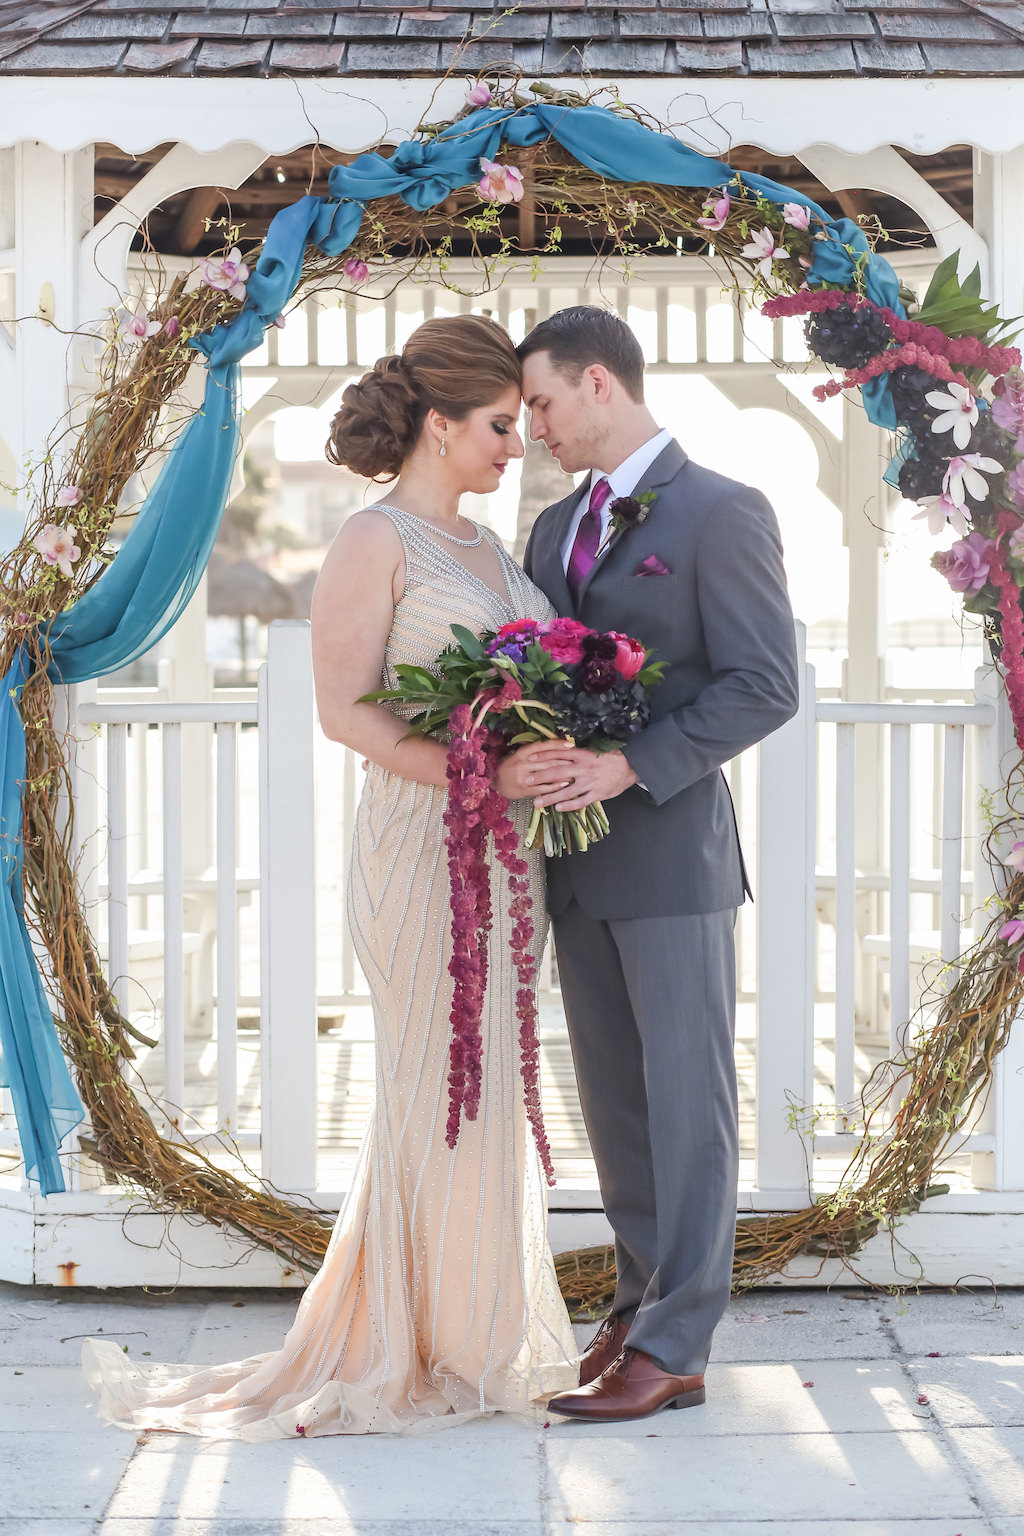 Outdoor Beach Wedding Ceremony at Gazebo with Whimsical Purple, Black, Magenta, Fuchsia, Plum and White Floral Wedding Arch with Greenery with Turquoise Draping, Bride in Jeweled Ivory Illusion Neckline Dress with Cascading Bouquet, Groom in Gray Suit with Fuchsia Tie | Tampa Bay Wedding Florist Gabro Event Services | Waterfront Venue Isla Del Sol Yacht and Country Club | Dress Shop Truly Forever Bridal | Menswear Sacino's Formalwear | Photographer Lifelong Studios Photography